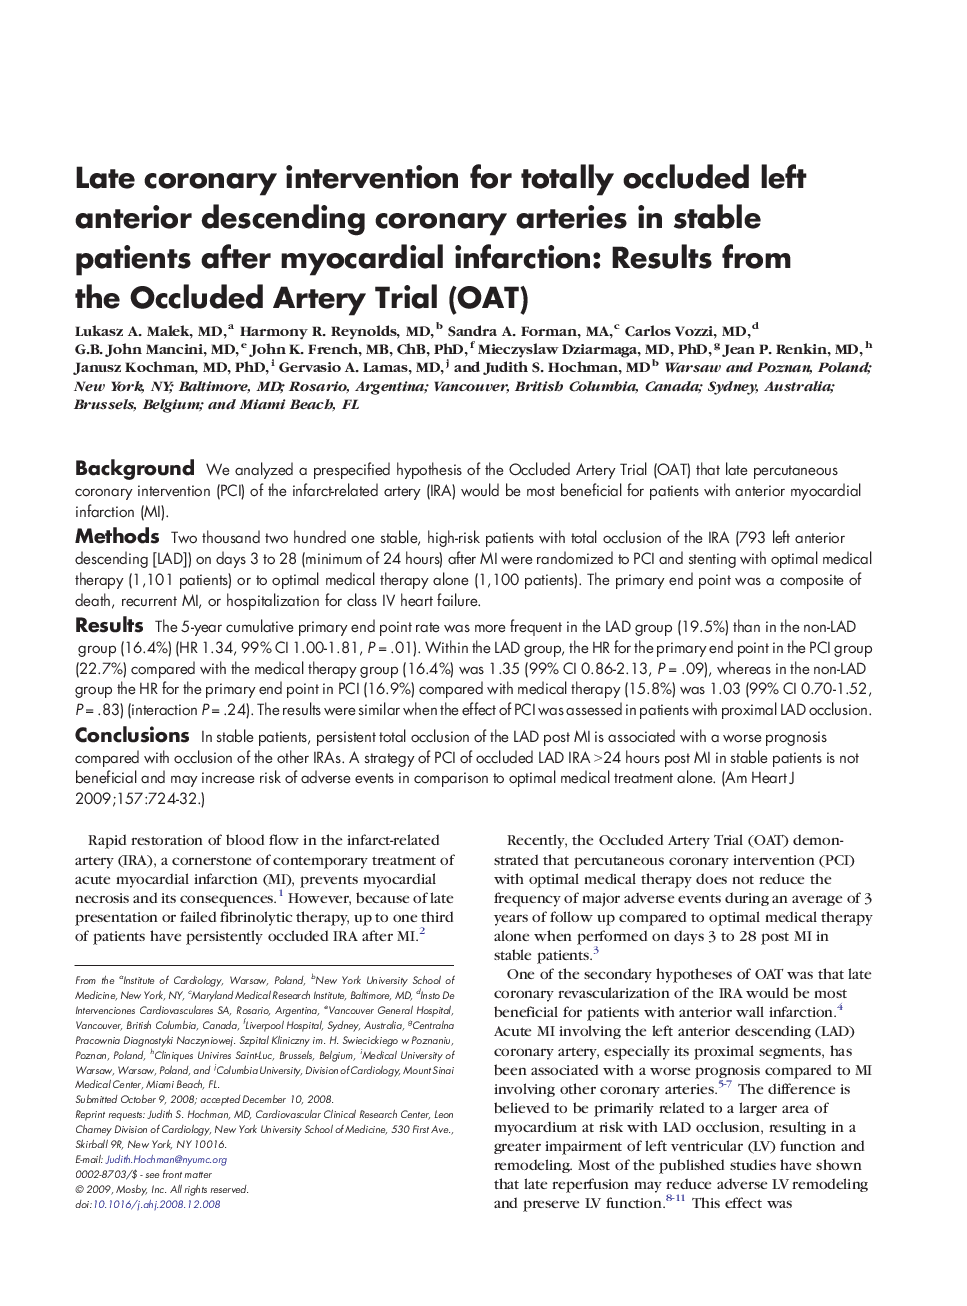 Late coronary intervention for totally occluded left anterior descending coronary arteries in stable patients after myocardial infarction: Results from the Occluded Artery Trial (OAT)